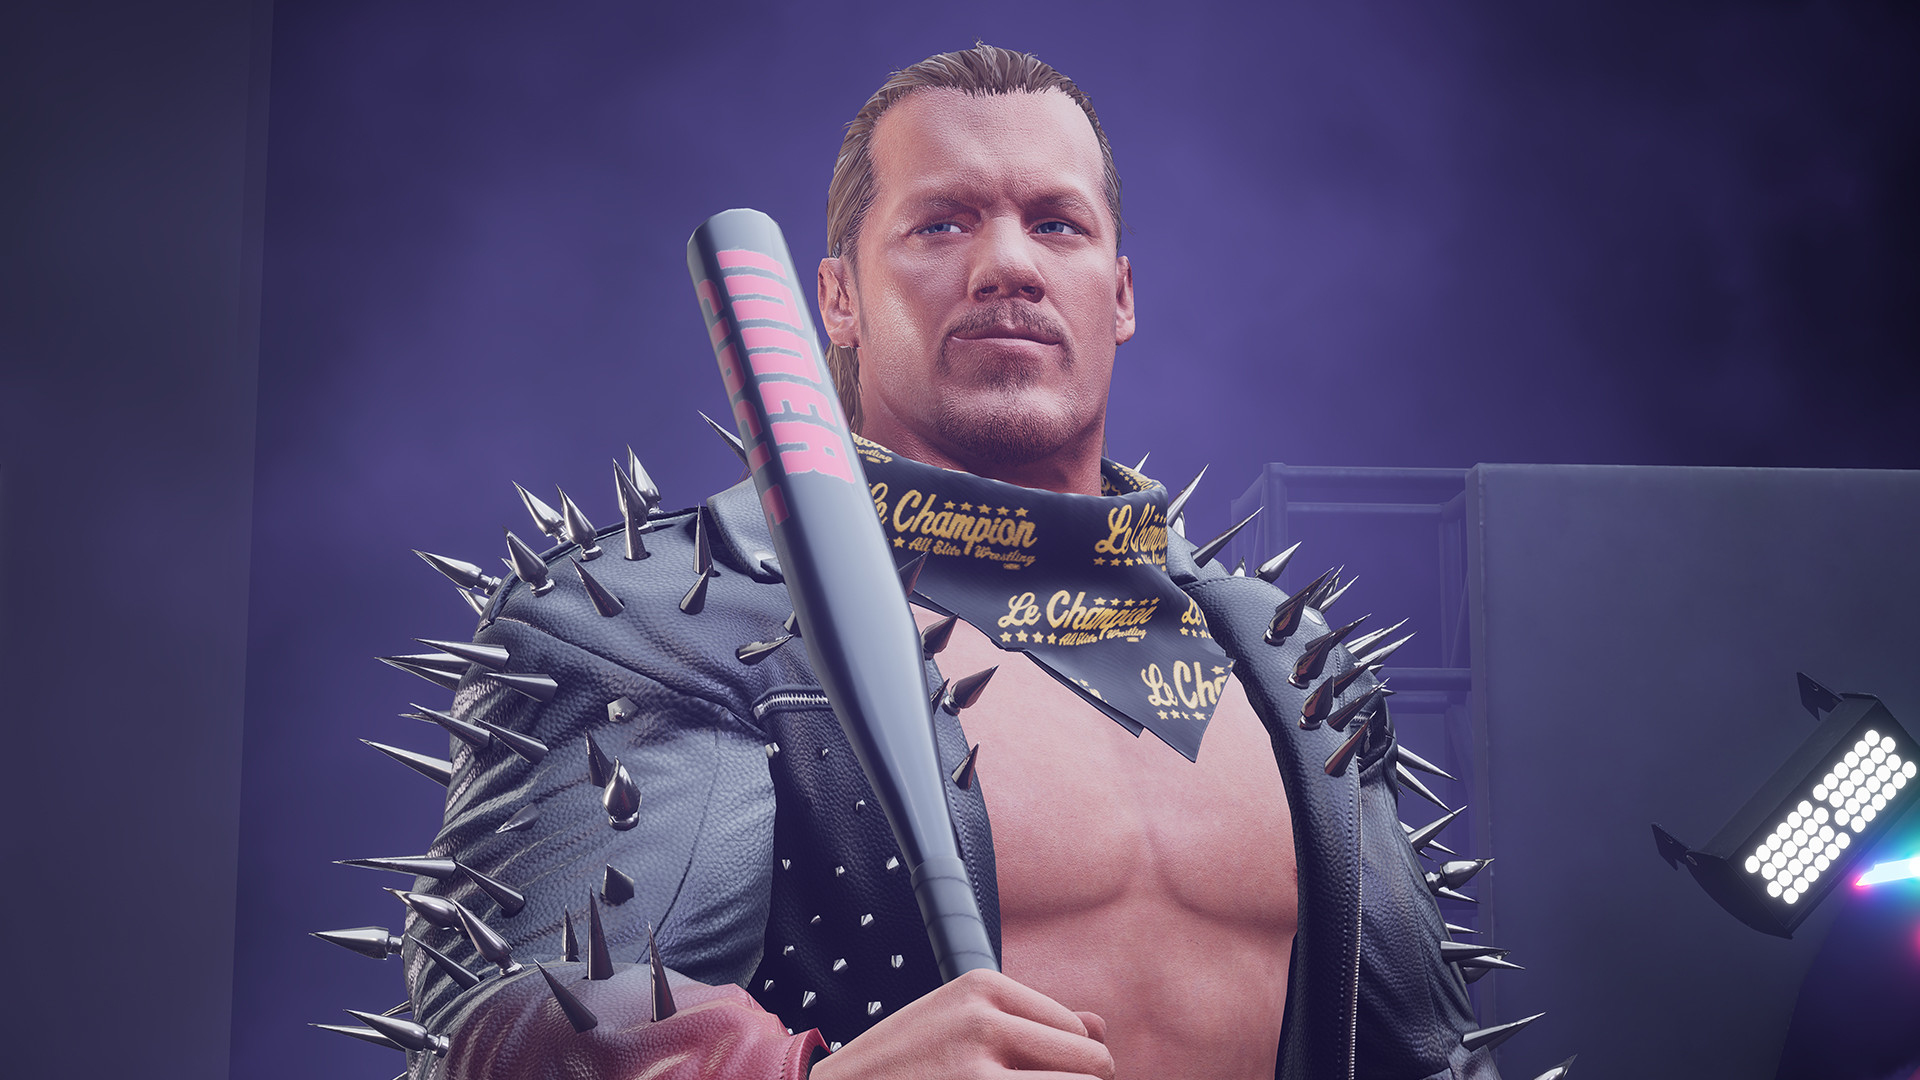 Wrestler Chris Jericho wears a leather jacket with metal spikes and wields a metal baseball bat in AEW Fight Forever